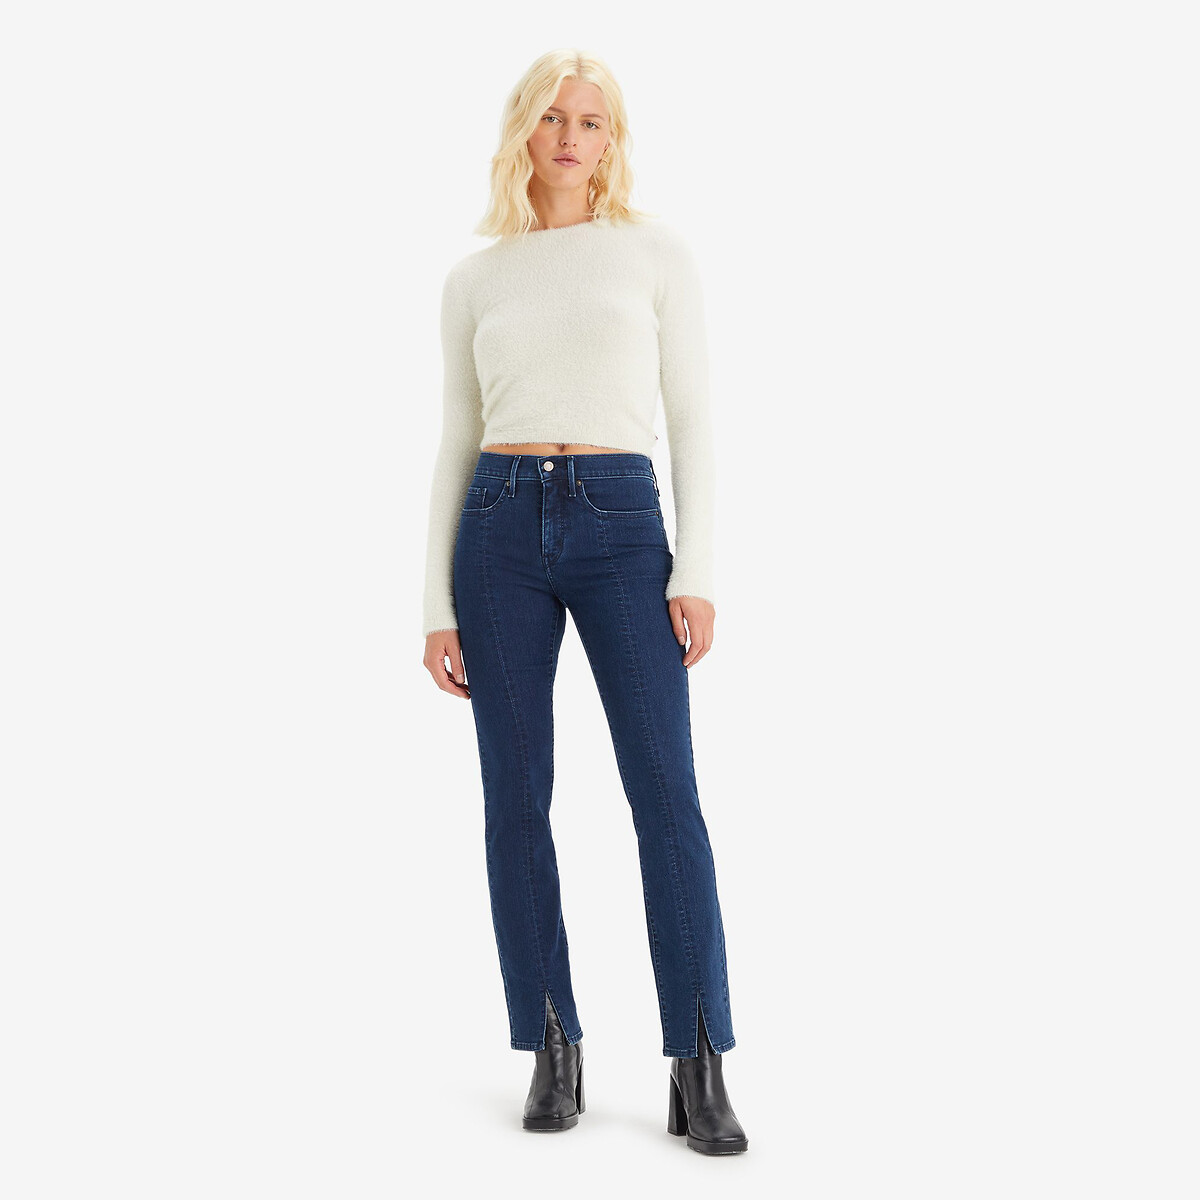 314™ shp seamed straight jeans in mid rise, more is not more, Levi's ...